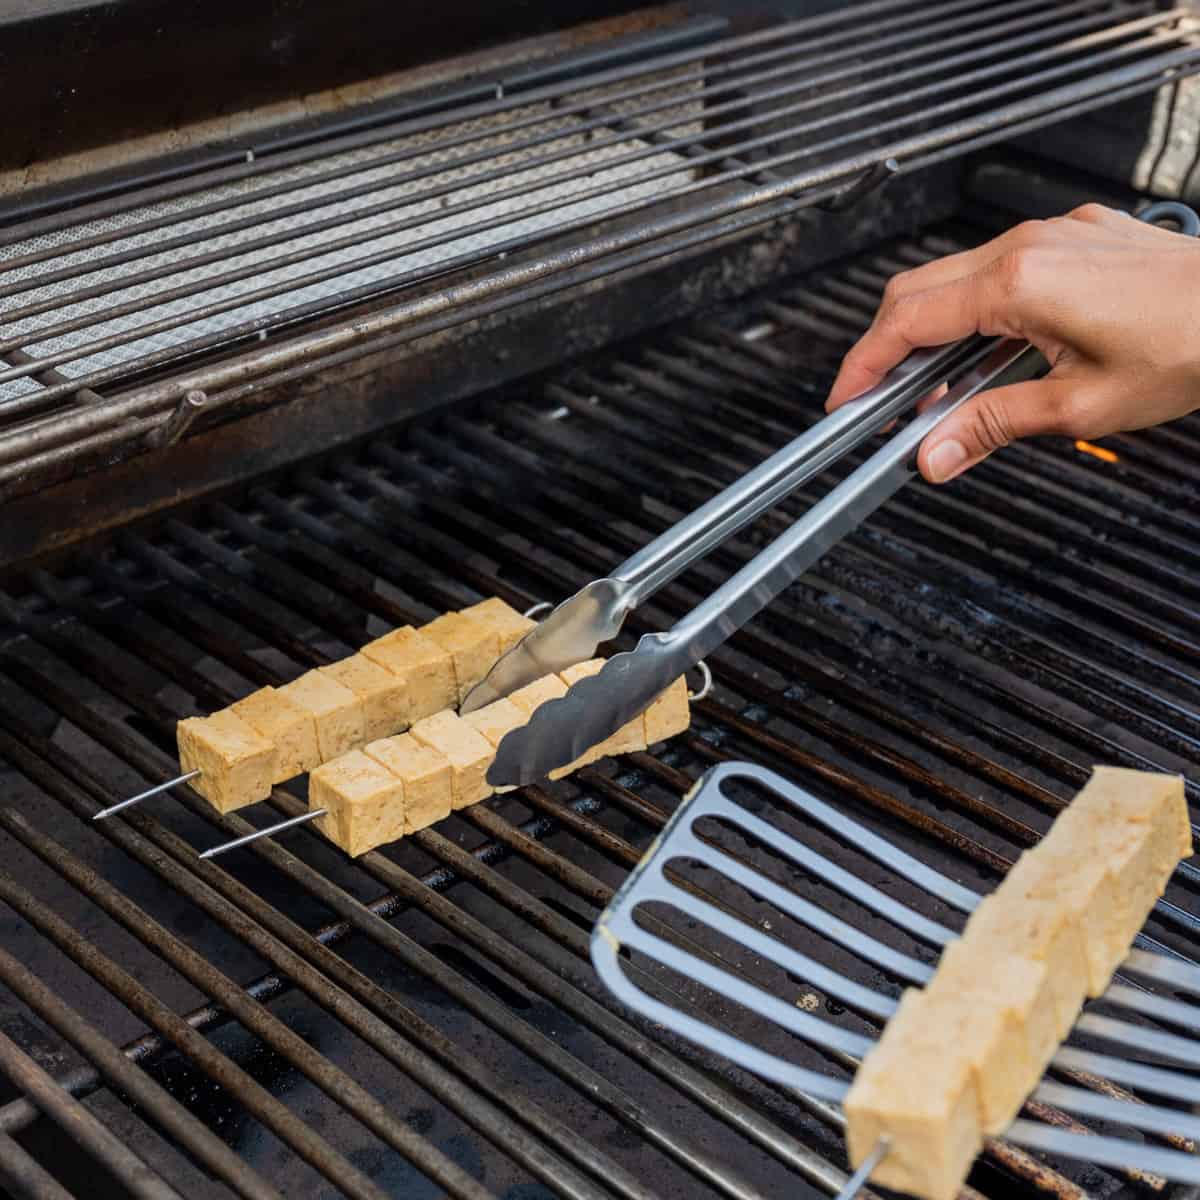 Woman's hands arranging marinated tofu skewers onto an outdoor gas grill.